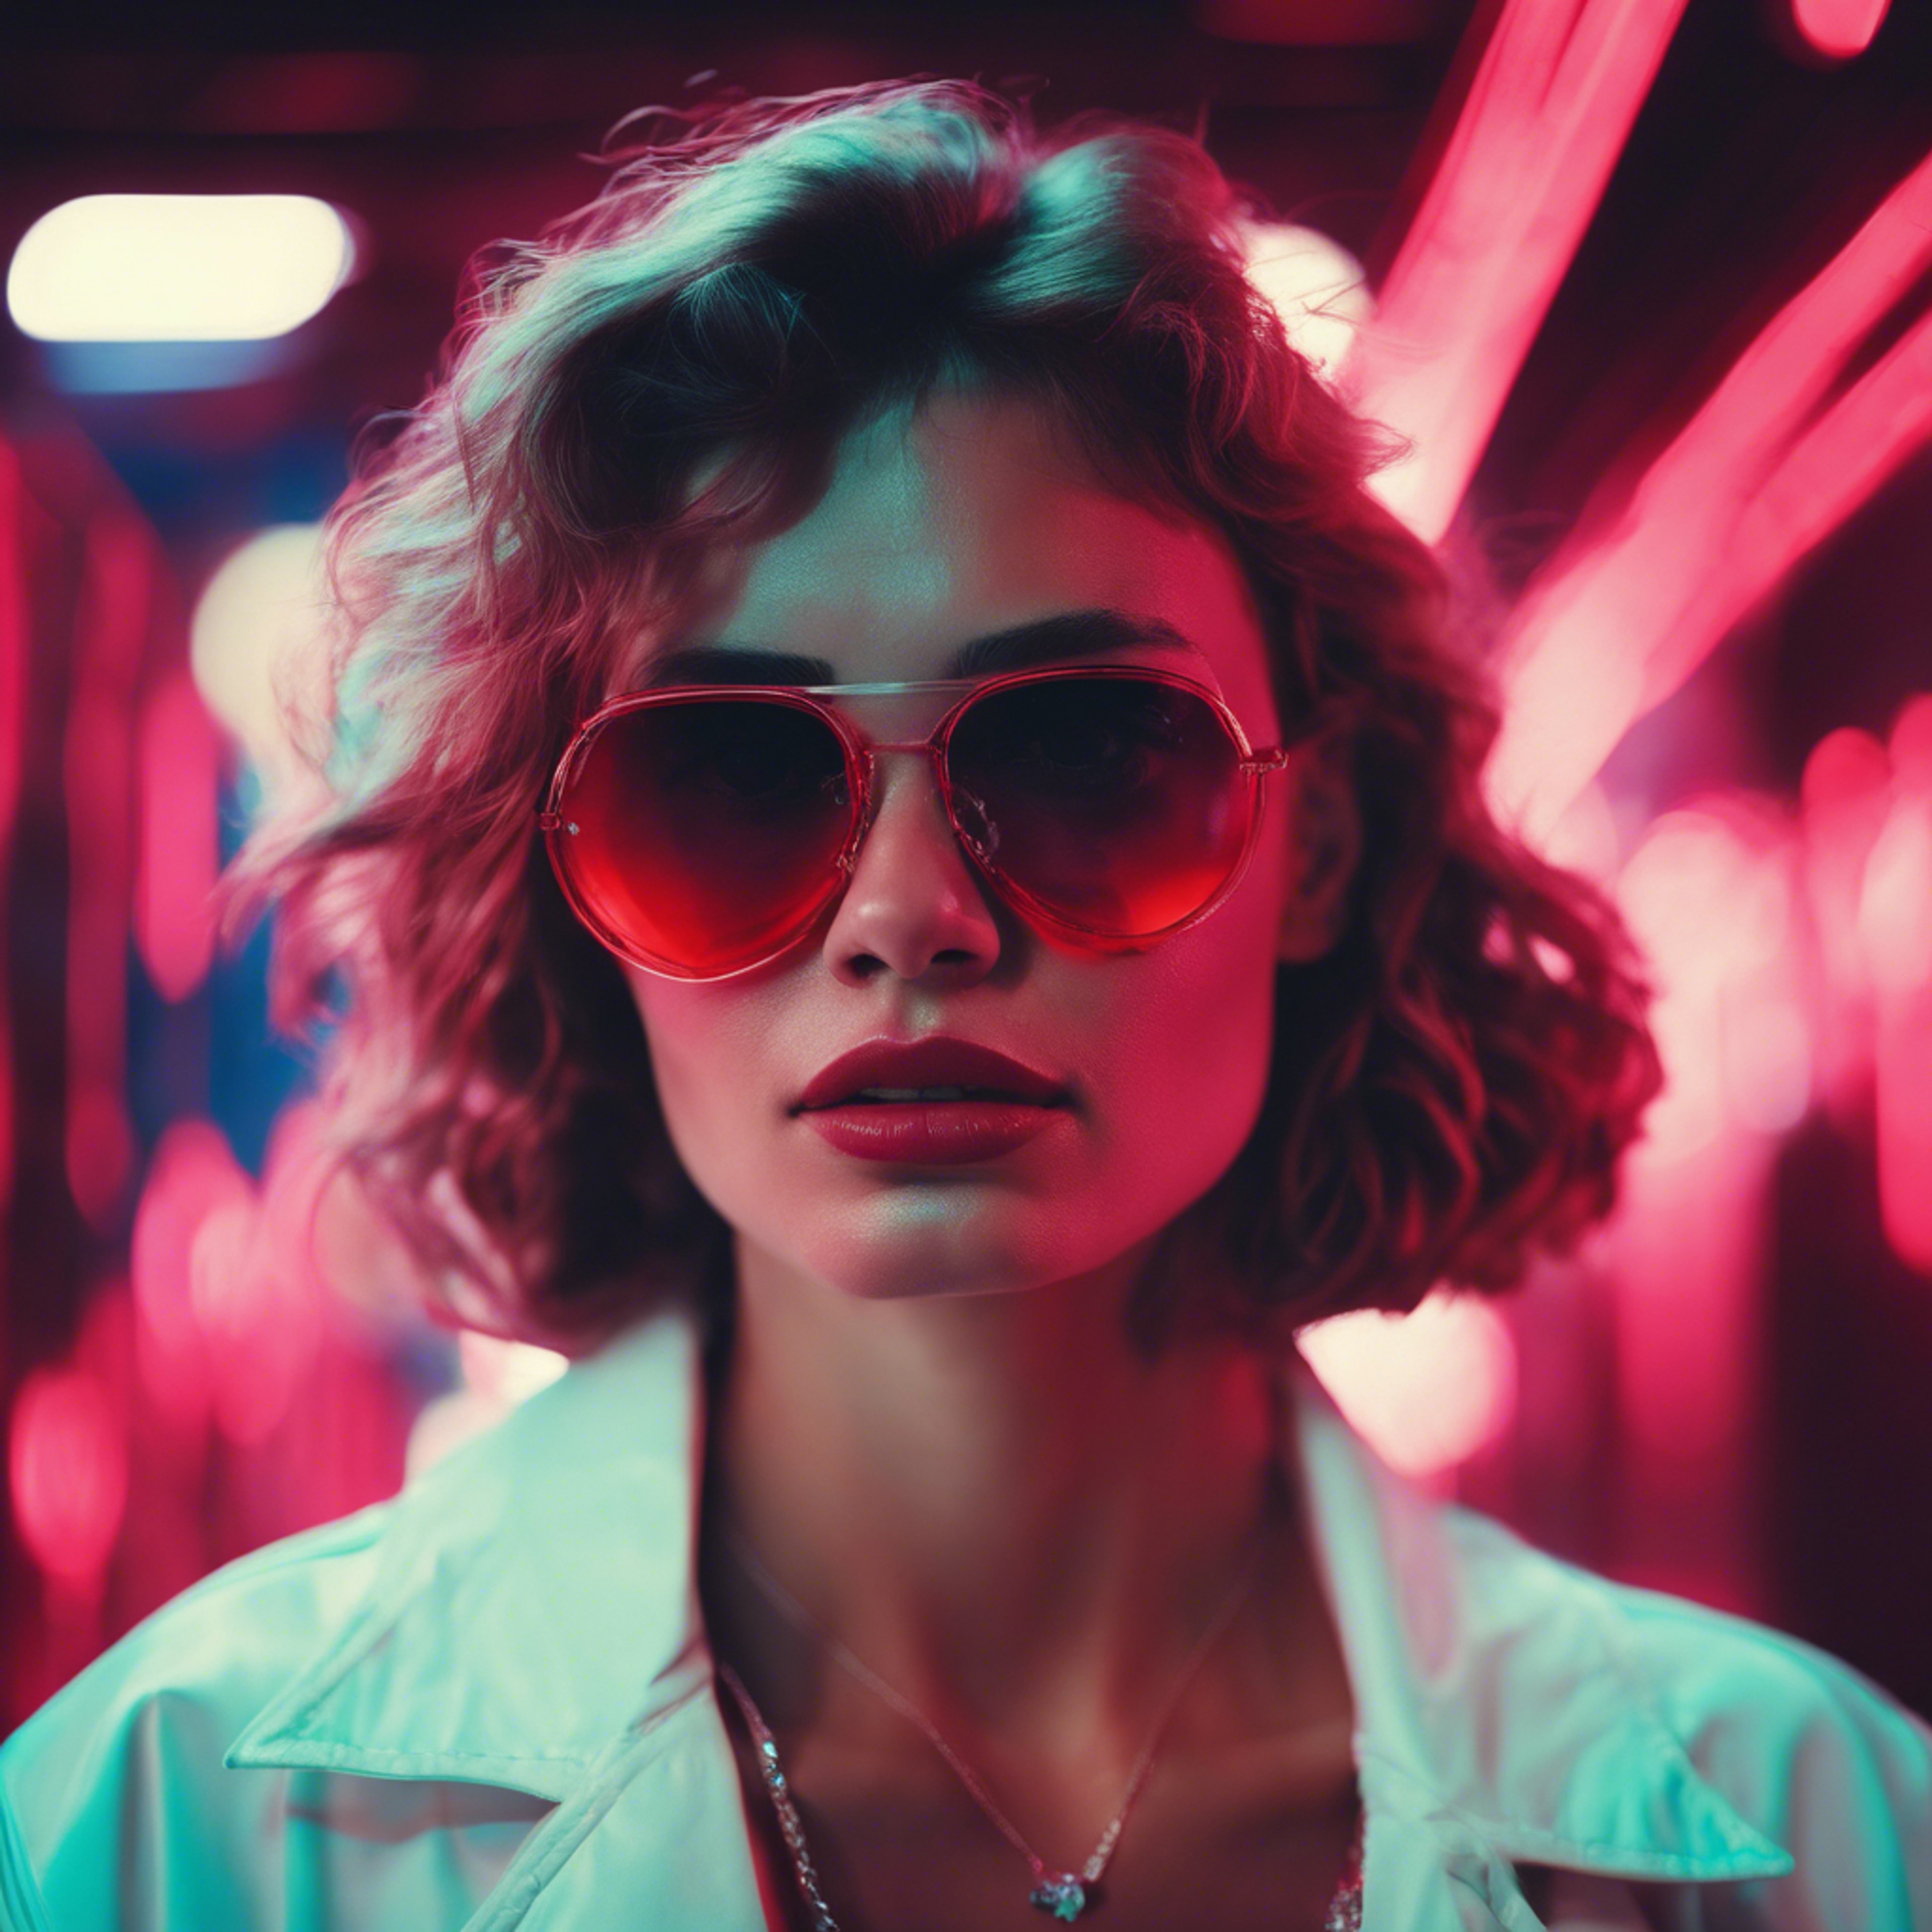 Retro 80's style portrait of a woman in sunglasses lit by cool red neon lights. Tapet[9fb655559f07479e9c29]